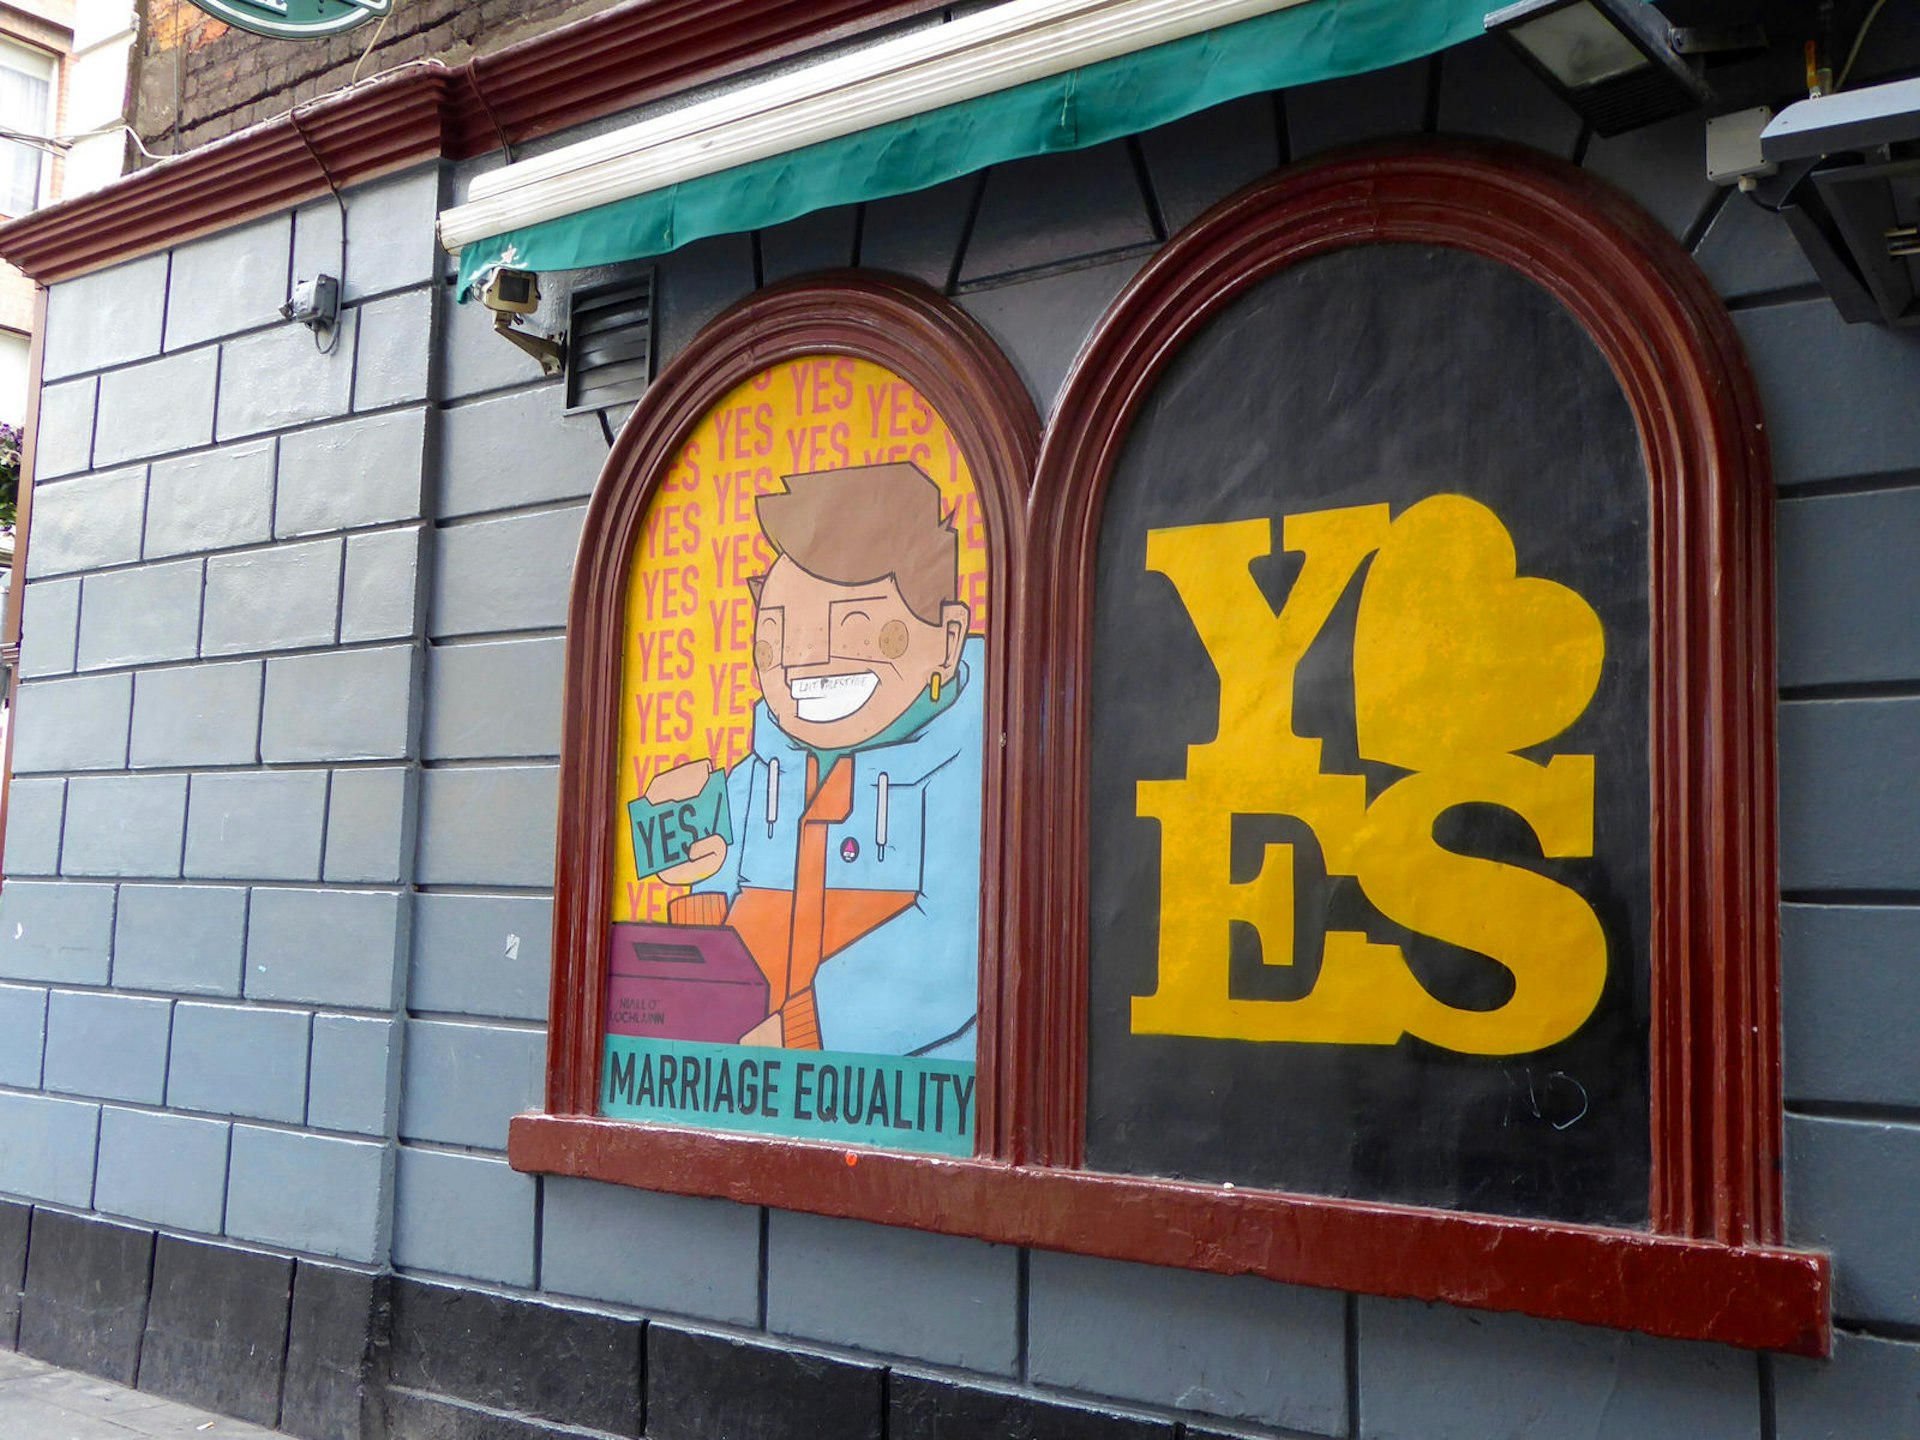 Artwork outside the George, one of the pillars of Dublin's LGBT scene © AnneMarie McCarthy / Lonely Planet